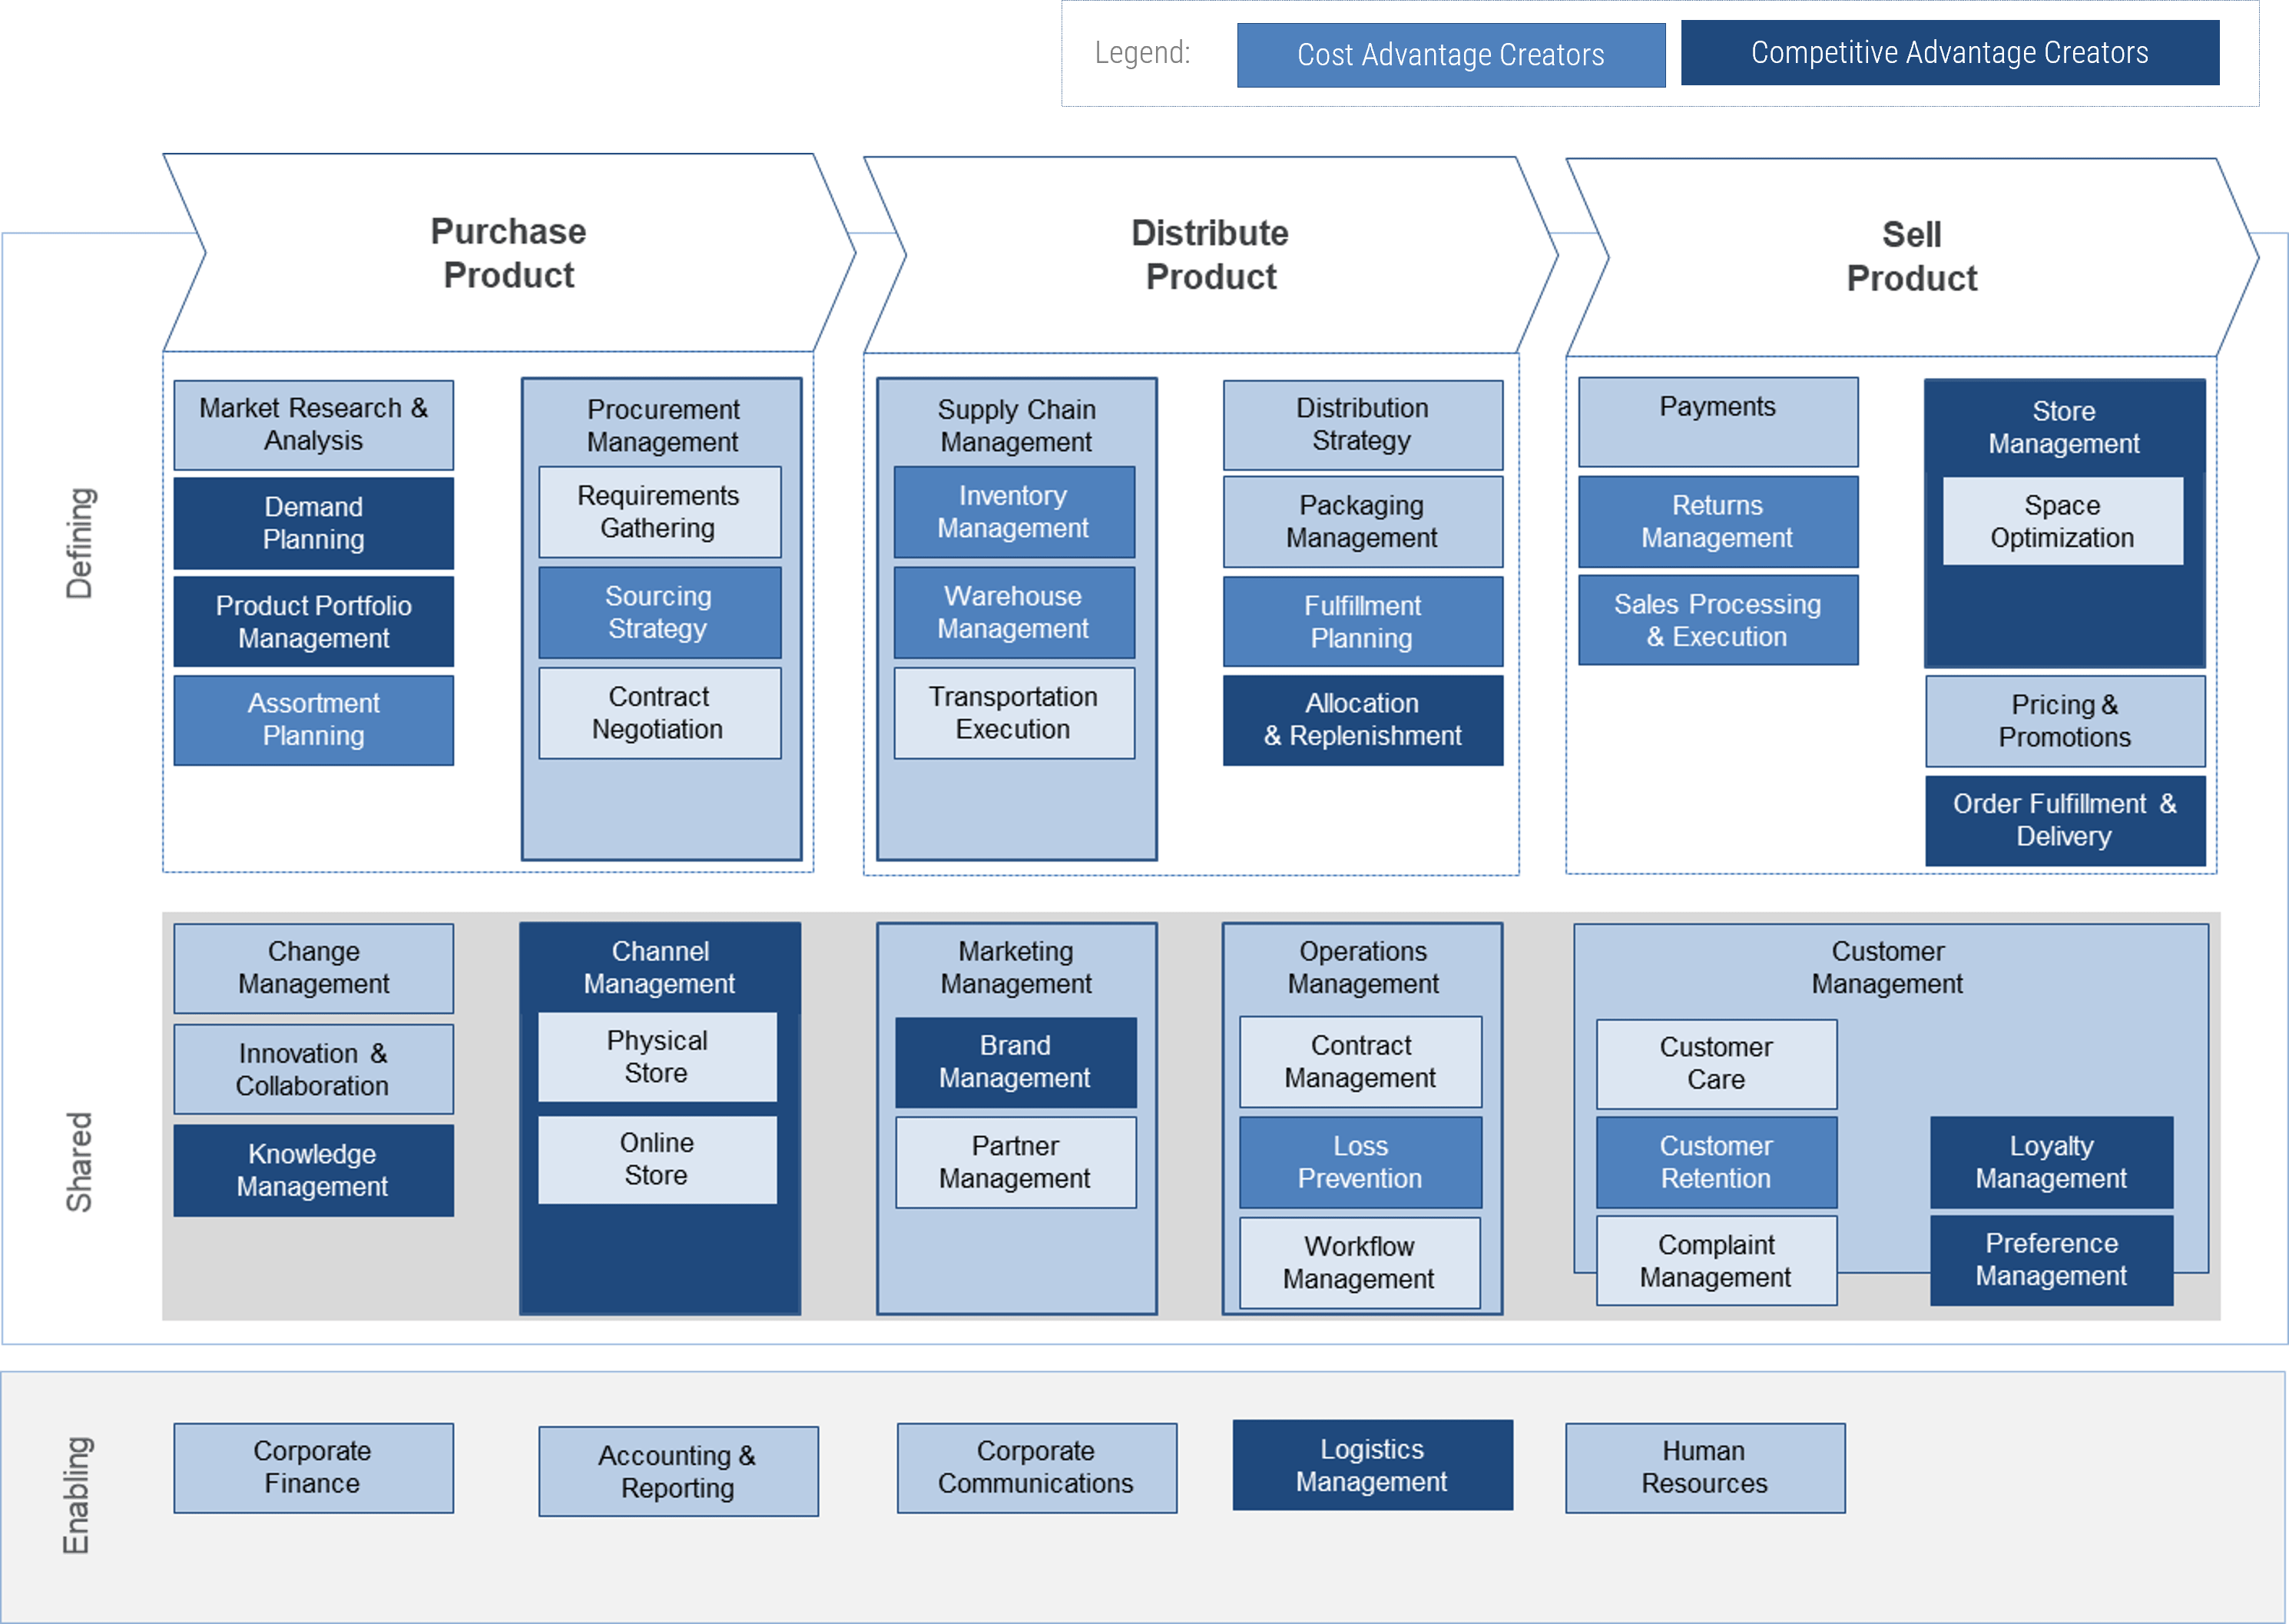 Example business capability map for Retail with capabilities categorized into Cost Advantage Creators and Competitive Advantage creators via a legend. Value stream items as column headers, and rows 'Enabling', 'Shared', and 'Defining'.